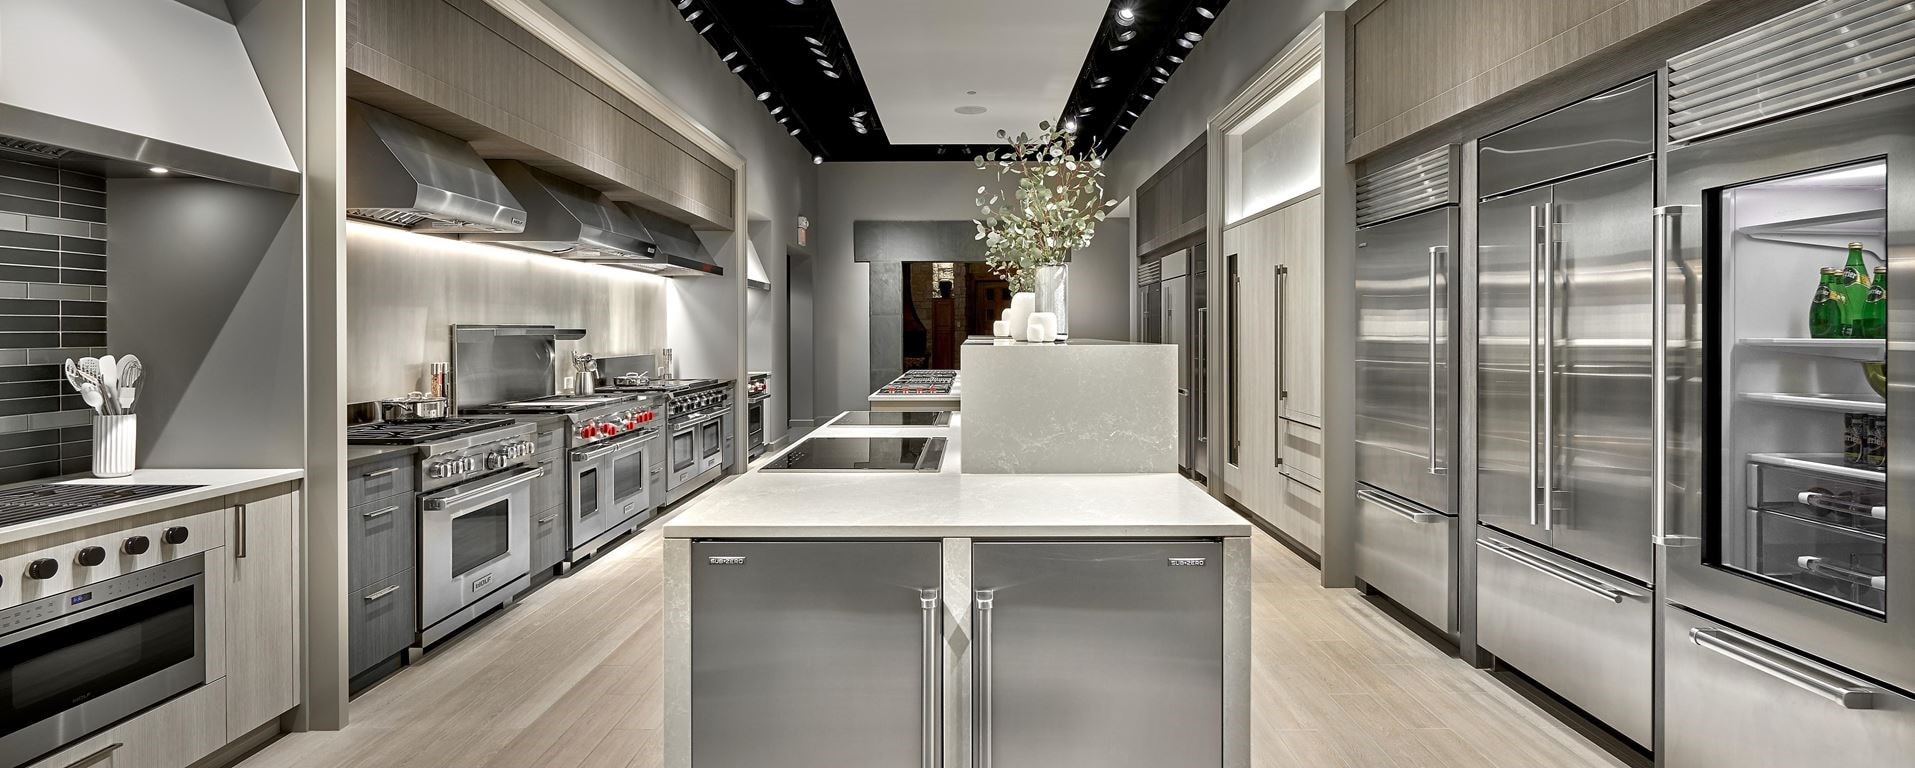 Explore luxury kitchen appliances in person at the Sub-Zero, Wolf, and Cove Showroom located in Glendale Heights, Illinois